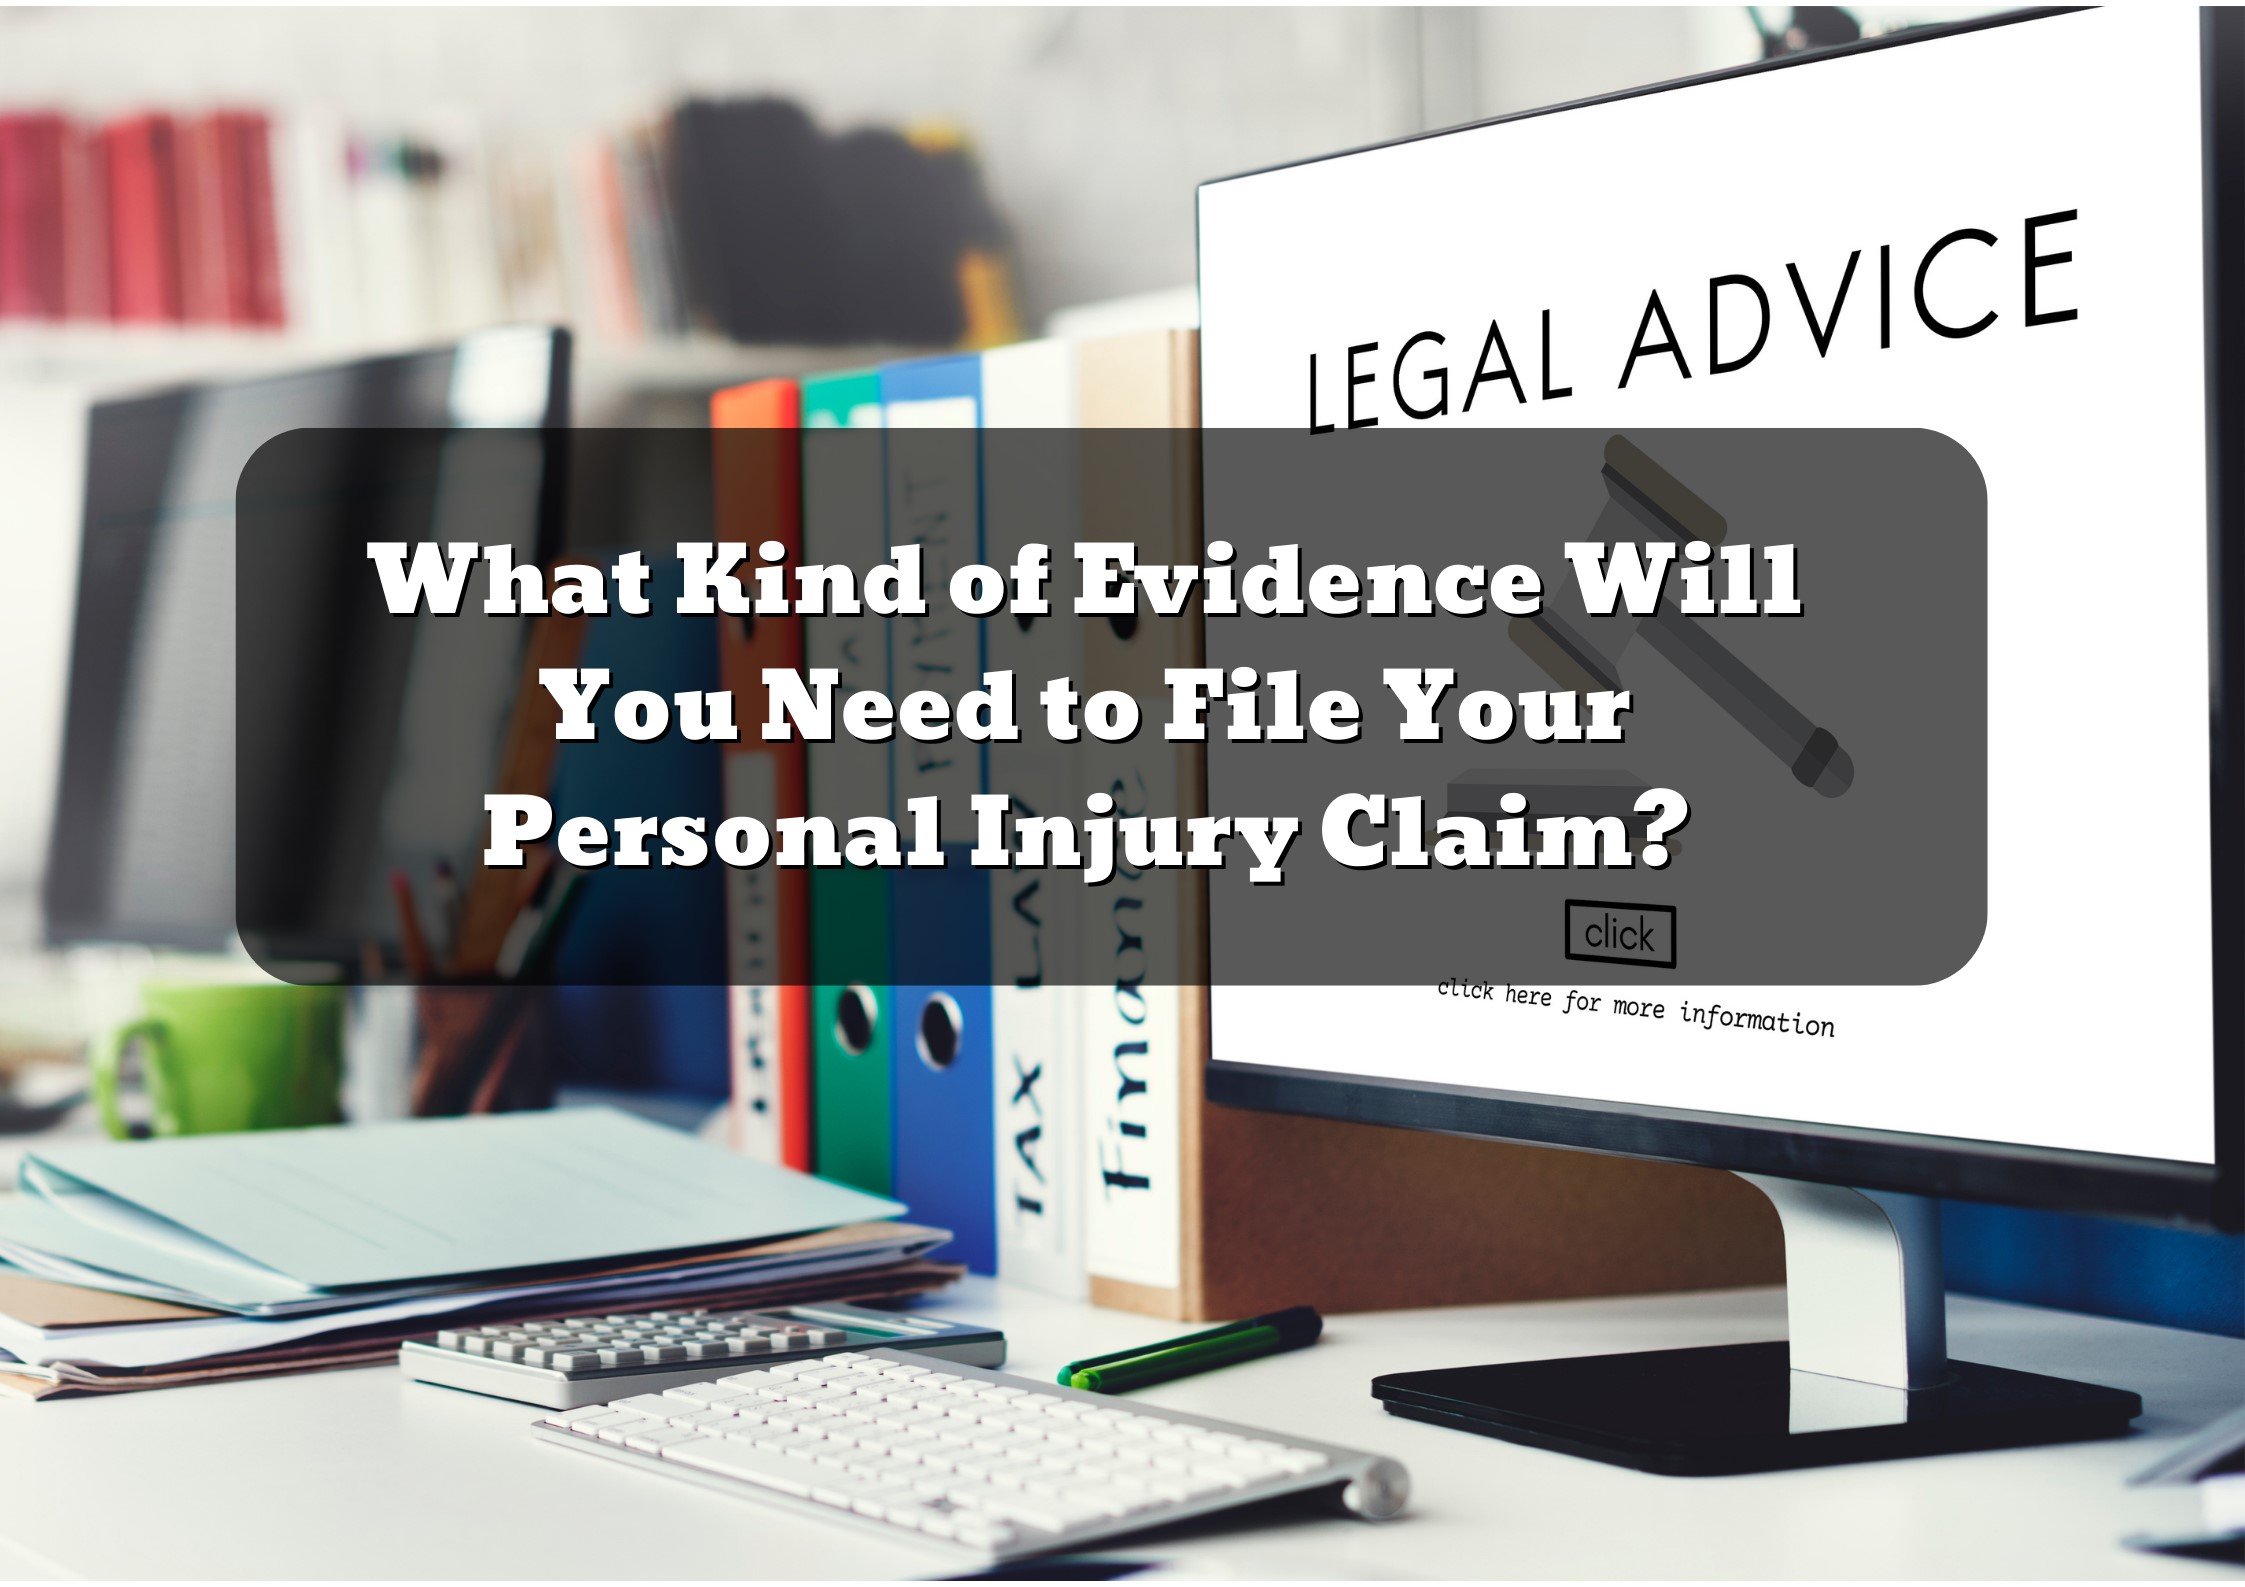 Seeking expert legal advice for serious personal injury in California